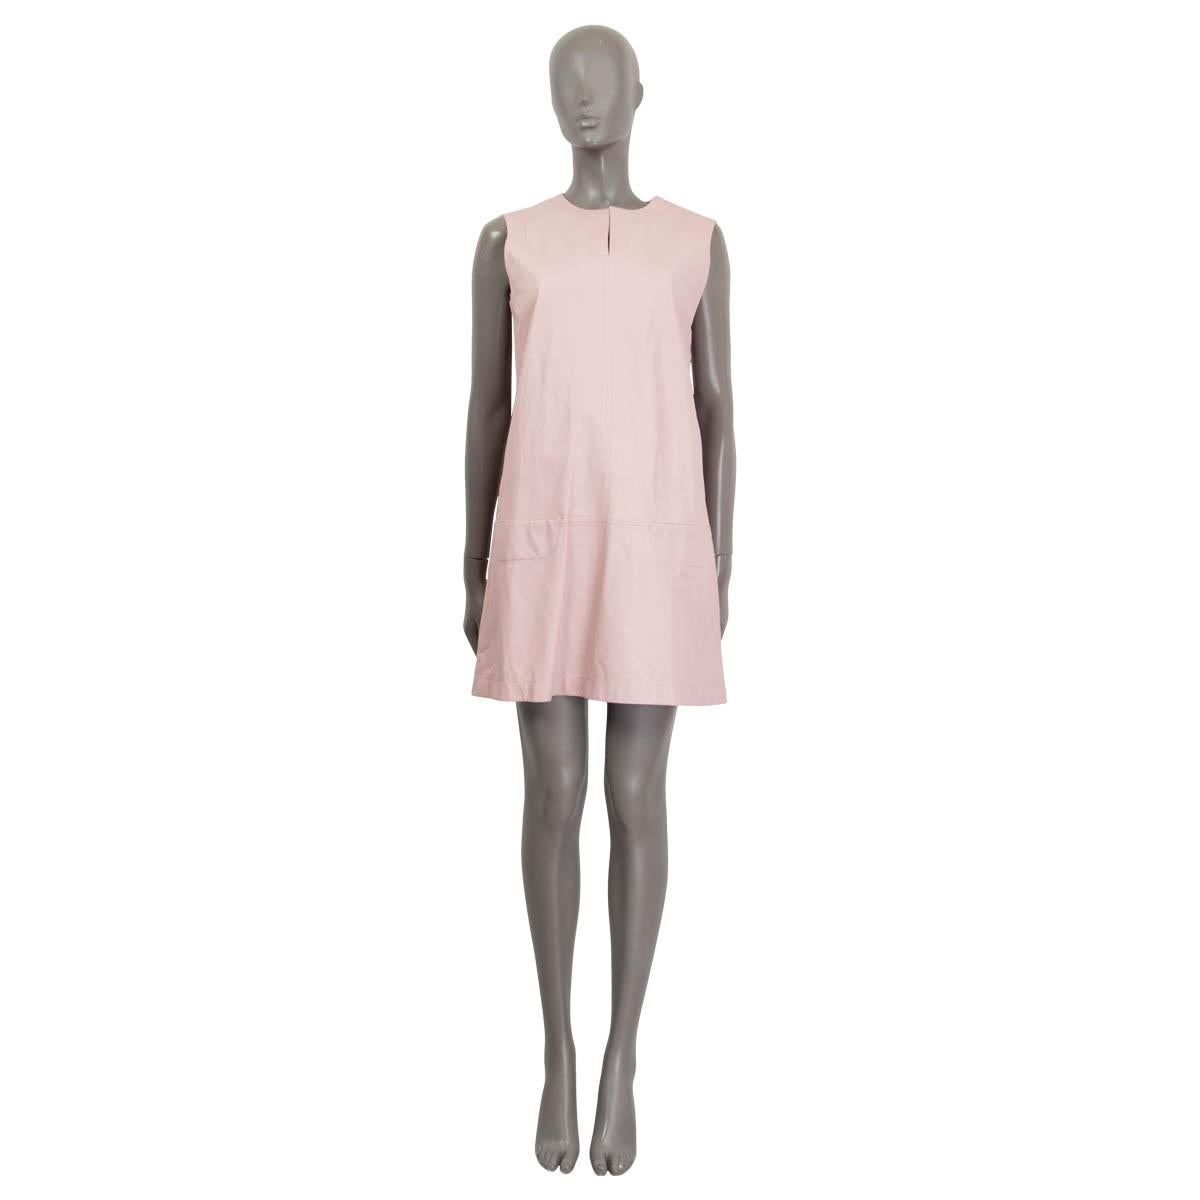 100% authentic Jil Sander shift dress in rose sheep leather (100%). Comes with a slit neck and two patch pockets on the front. Opens with a concealed zipper on the side. Lined in off-white cotton (100%). Has been worn and is in excellent